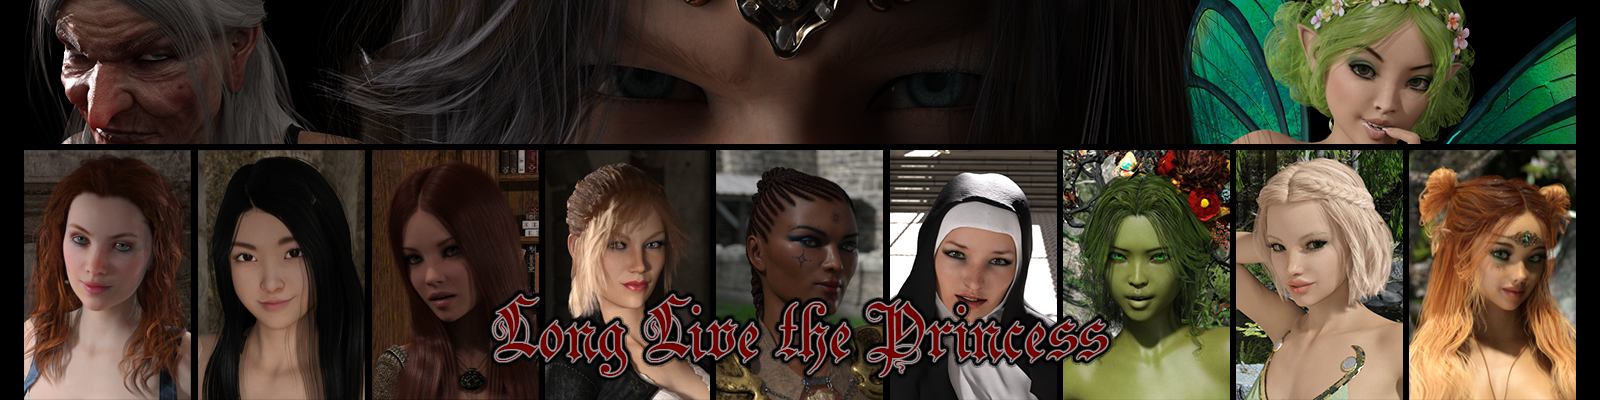 Long Live the Princess [Belle] Game Download